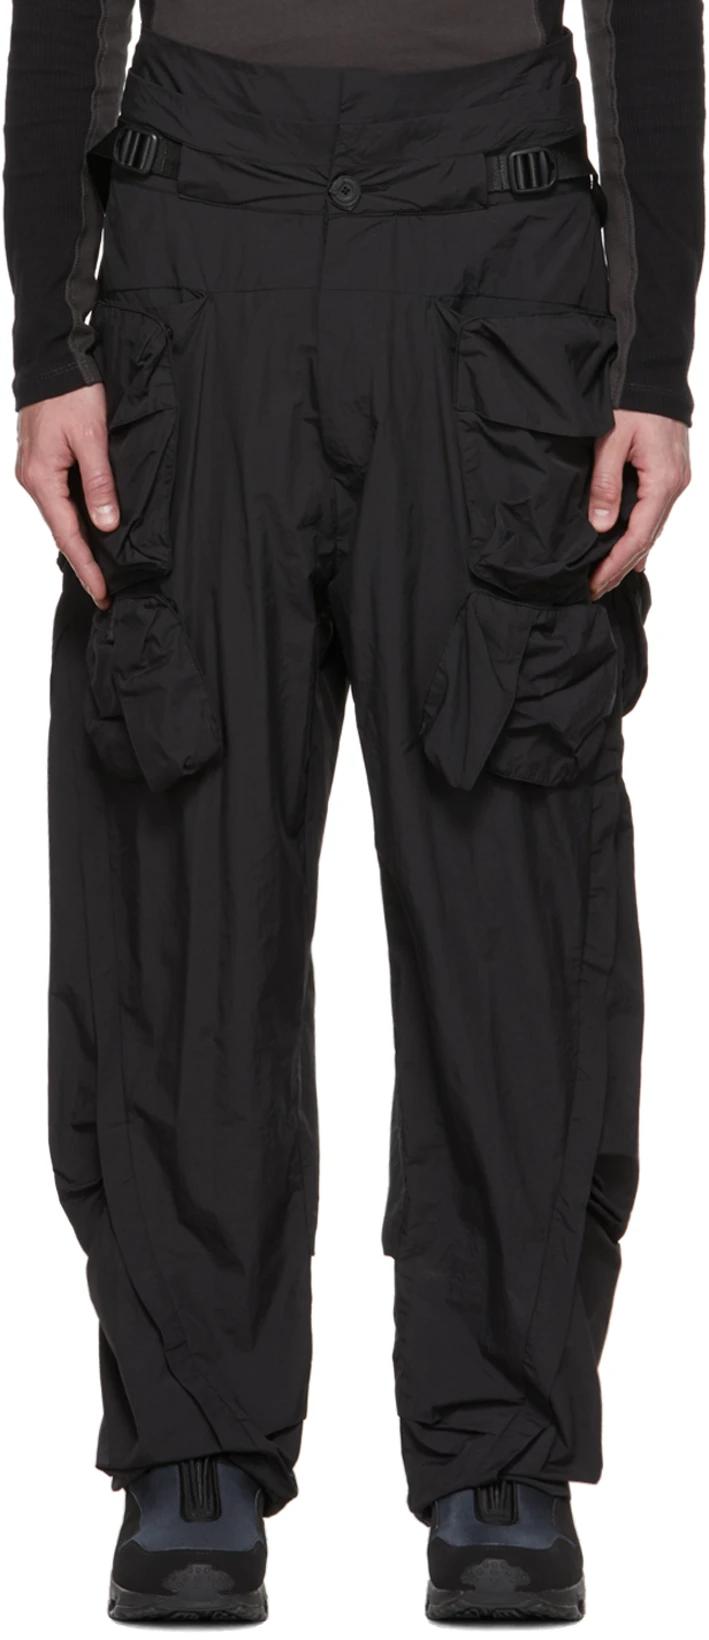 Black Extended Waistband Cargo Pants by ARCHIVAL REINVENT